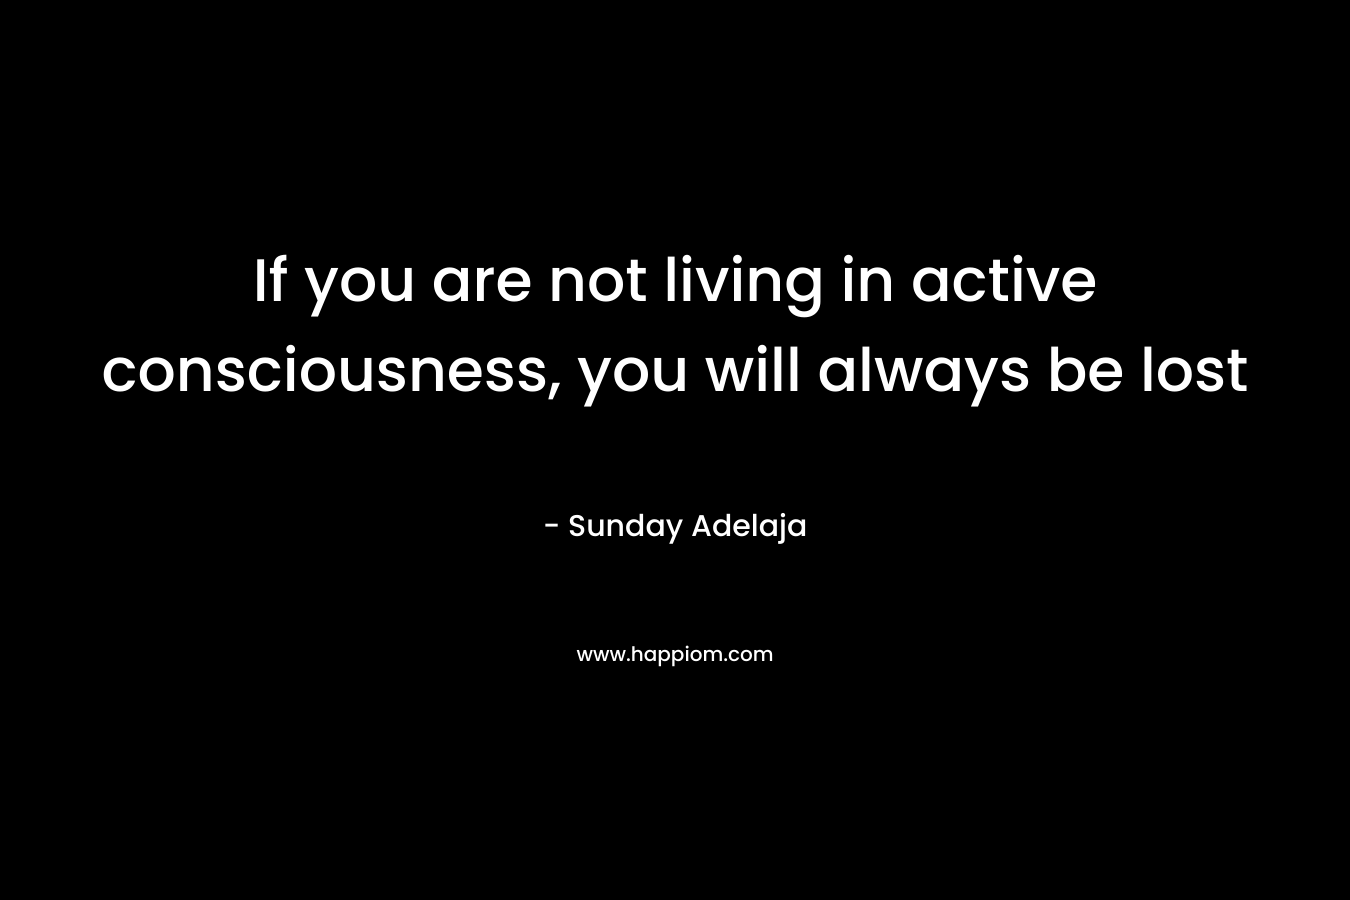 If you are not living in active consciousness, you will always be lost